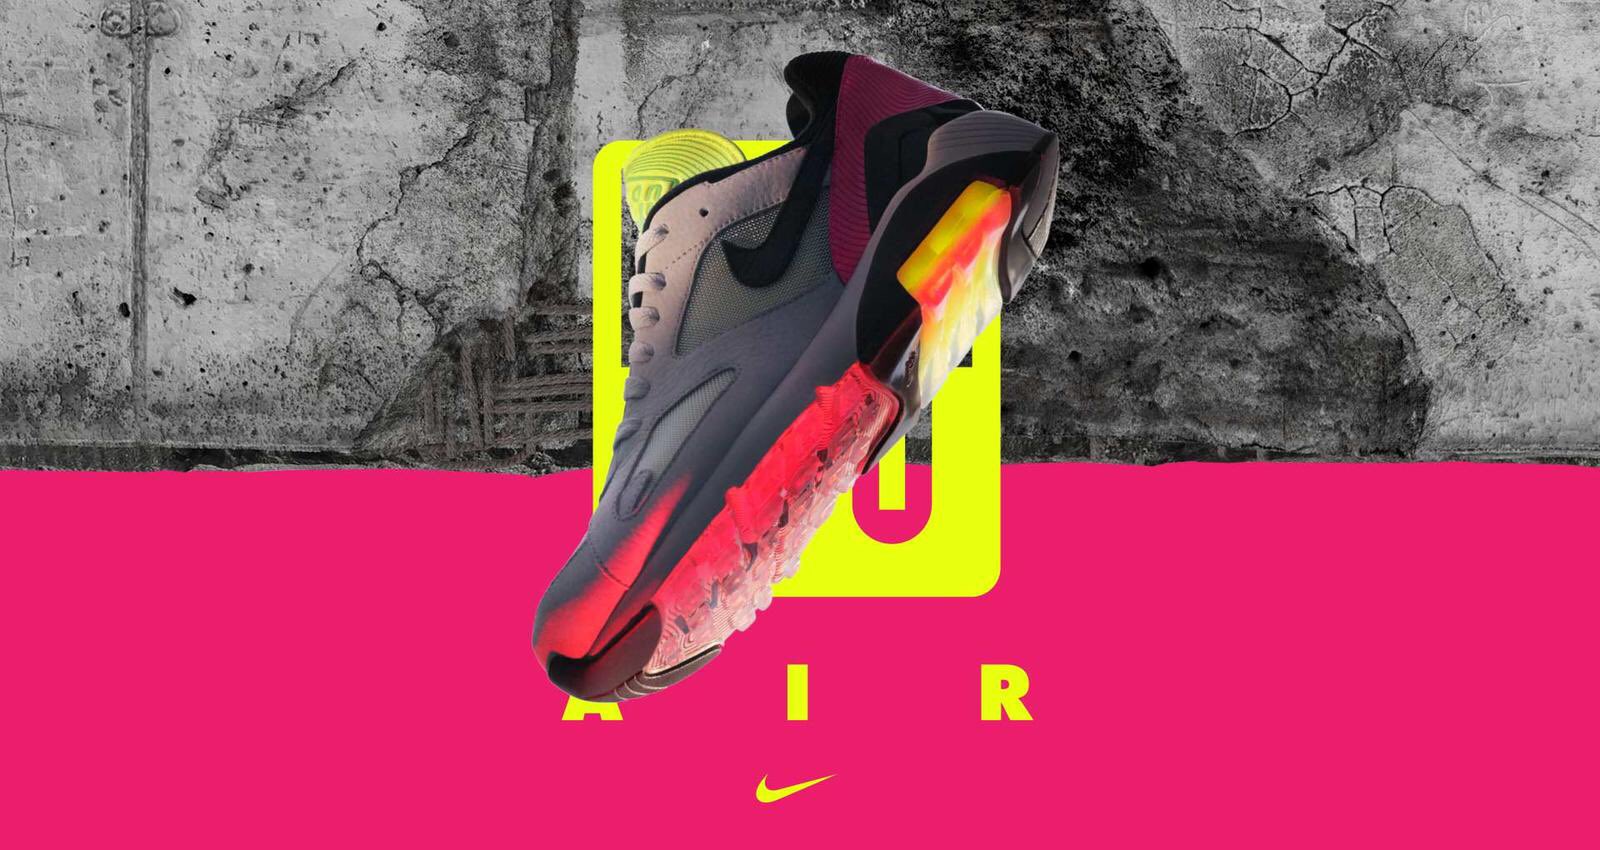 Apoyarse recibo Aprovechar B/R Kicks on Twitter: "The Nike Air Max 180 BLN celebrates Berlin's unique  nightlife and music culture. The shoe releases on Air Max Day in Berlin  only. March 30 for the rest